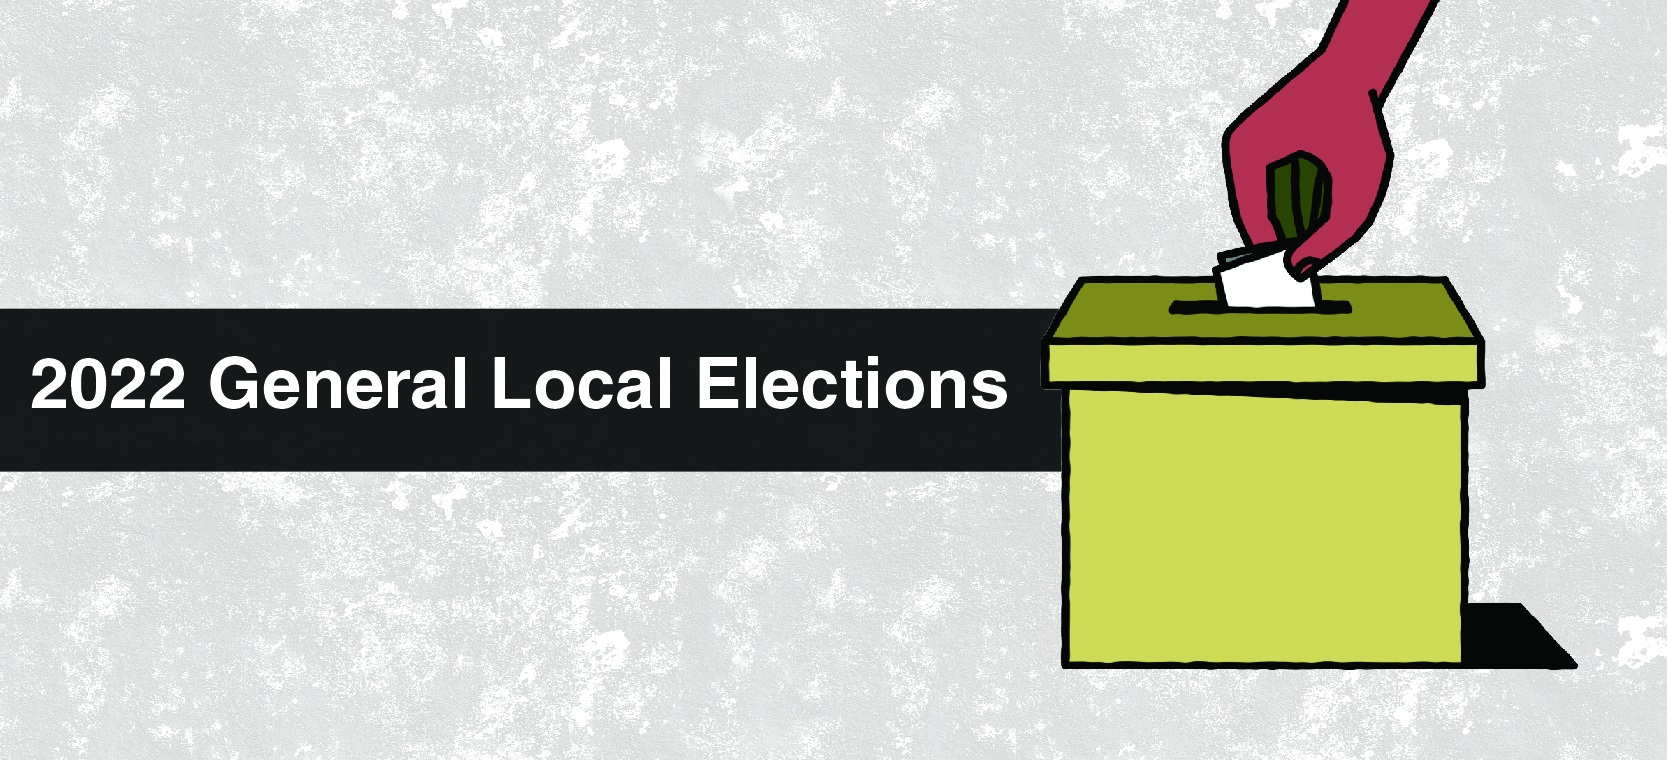 The 2022 General Local Elections are on October 15, 2022. Elections BC administers campaign financing, disclosure and election advertising rules in local elections.